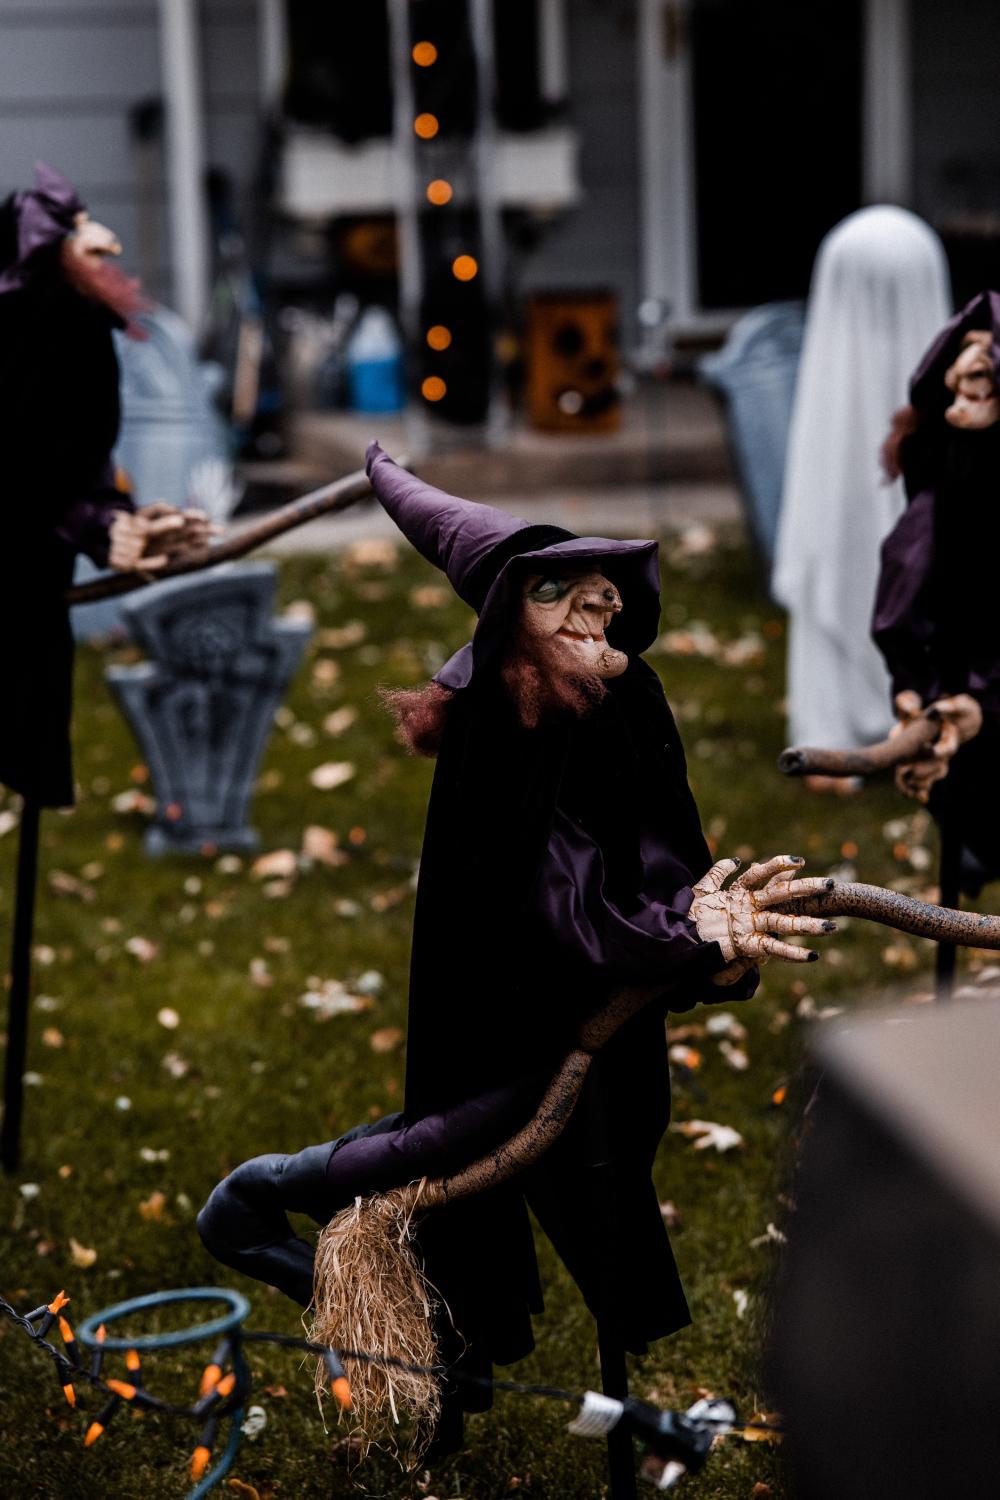 Scary witch outdoor halloween decoration ideas